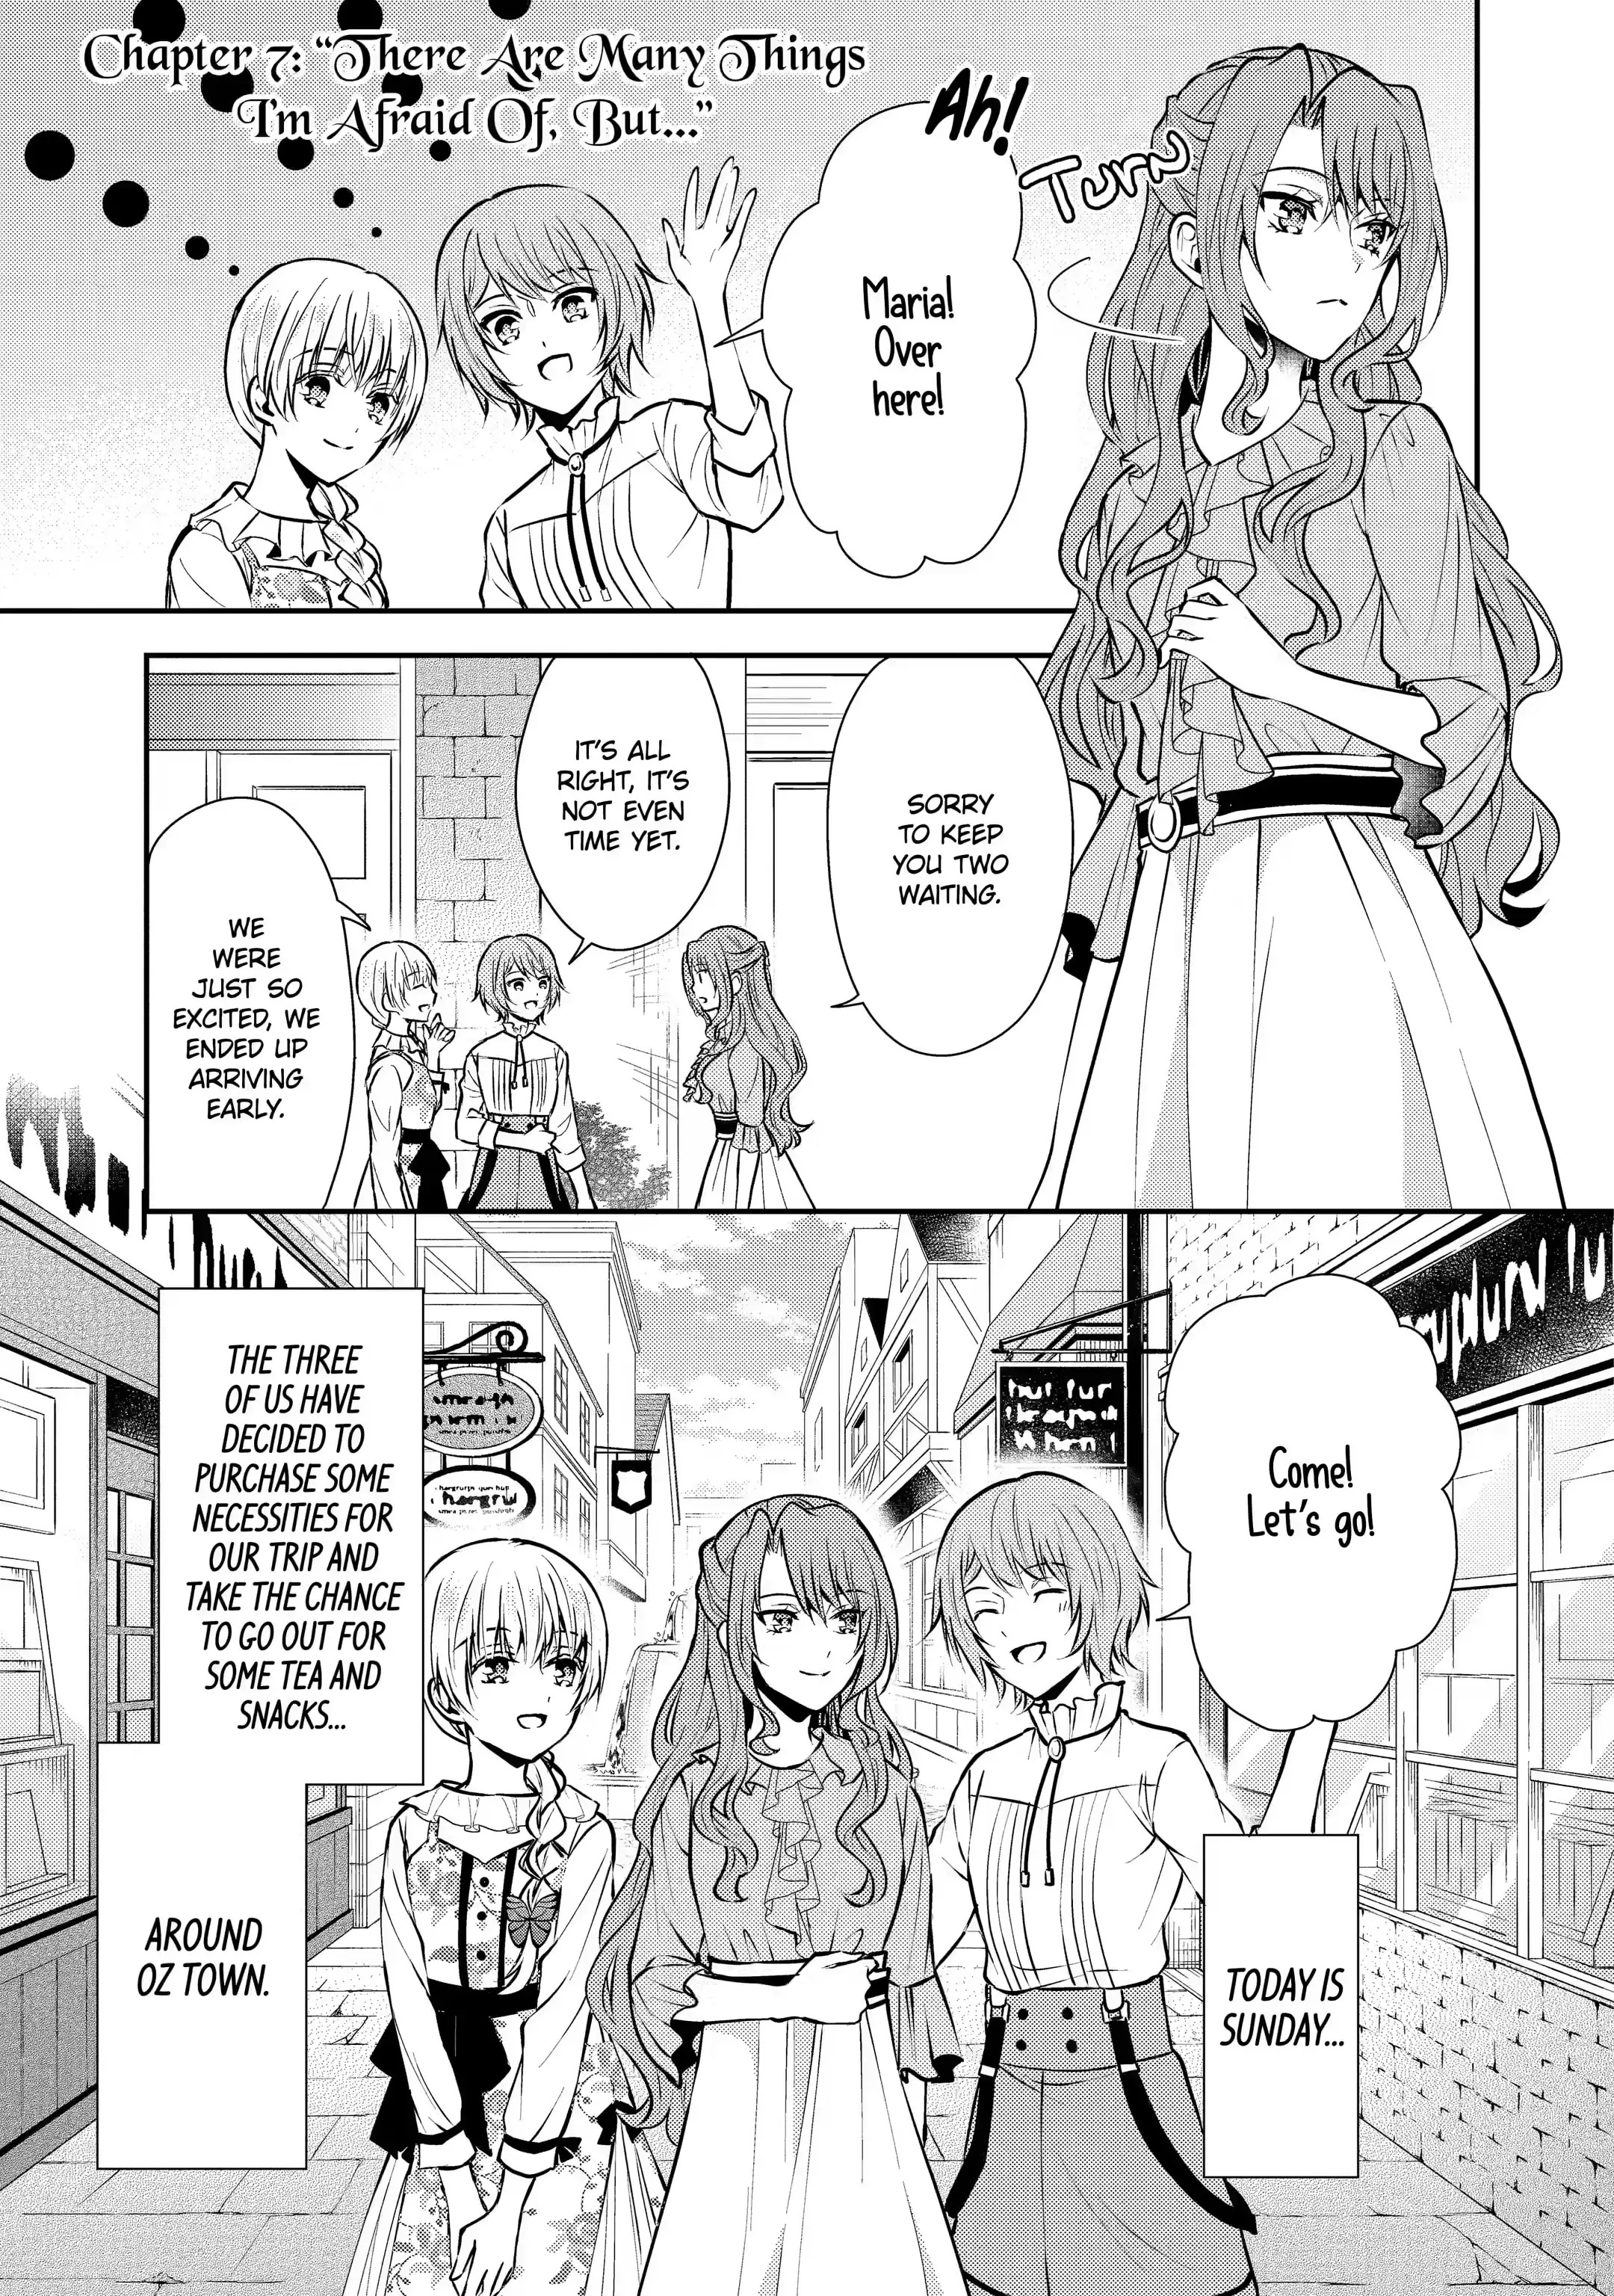 Auto-Mode Expired In The 6Th Round Of The Otome Game - Page 1